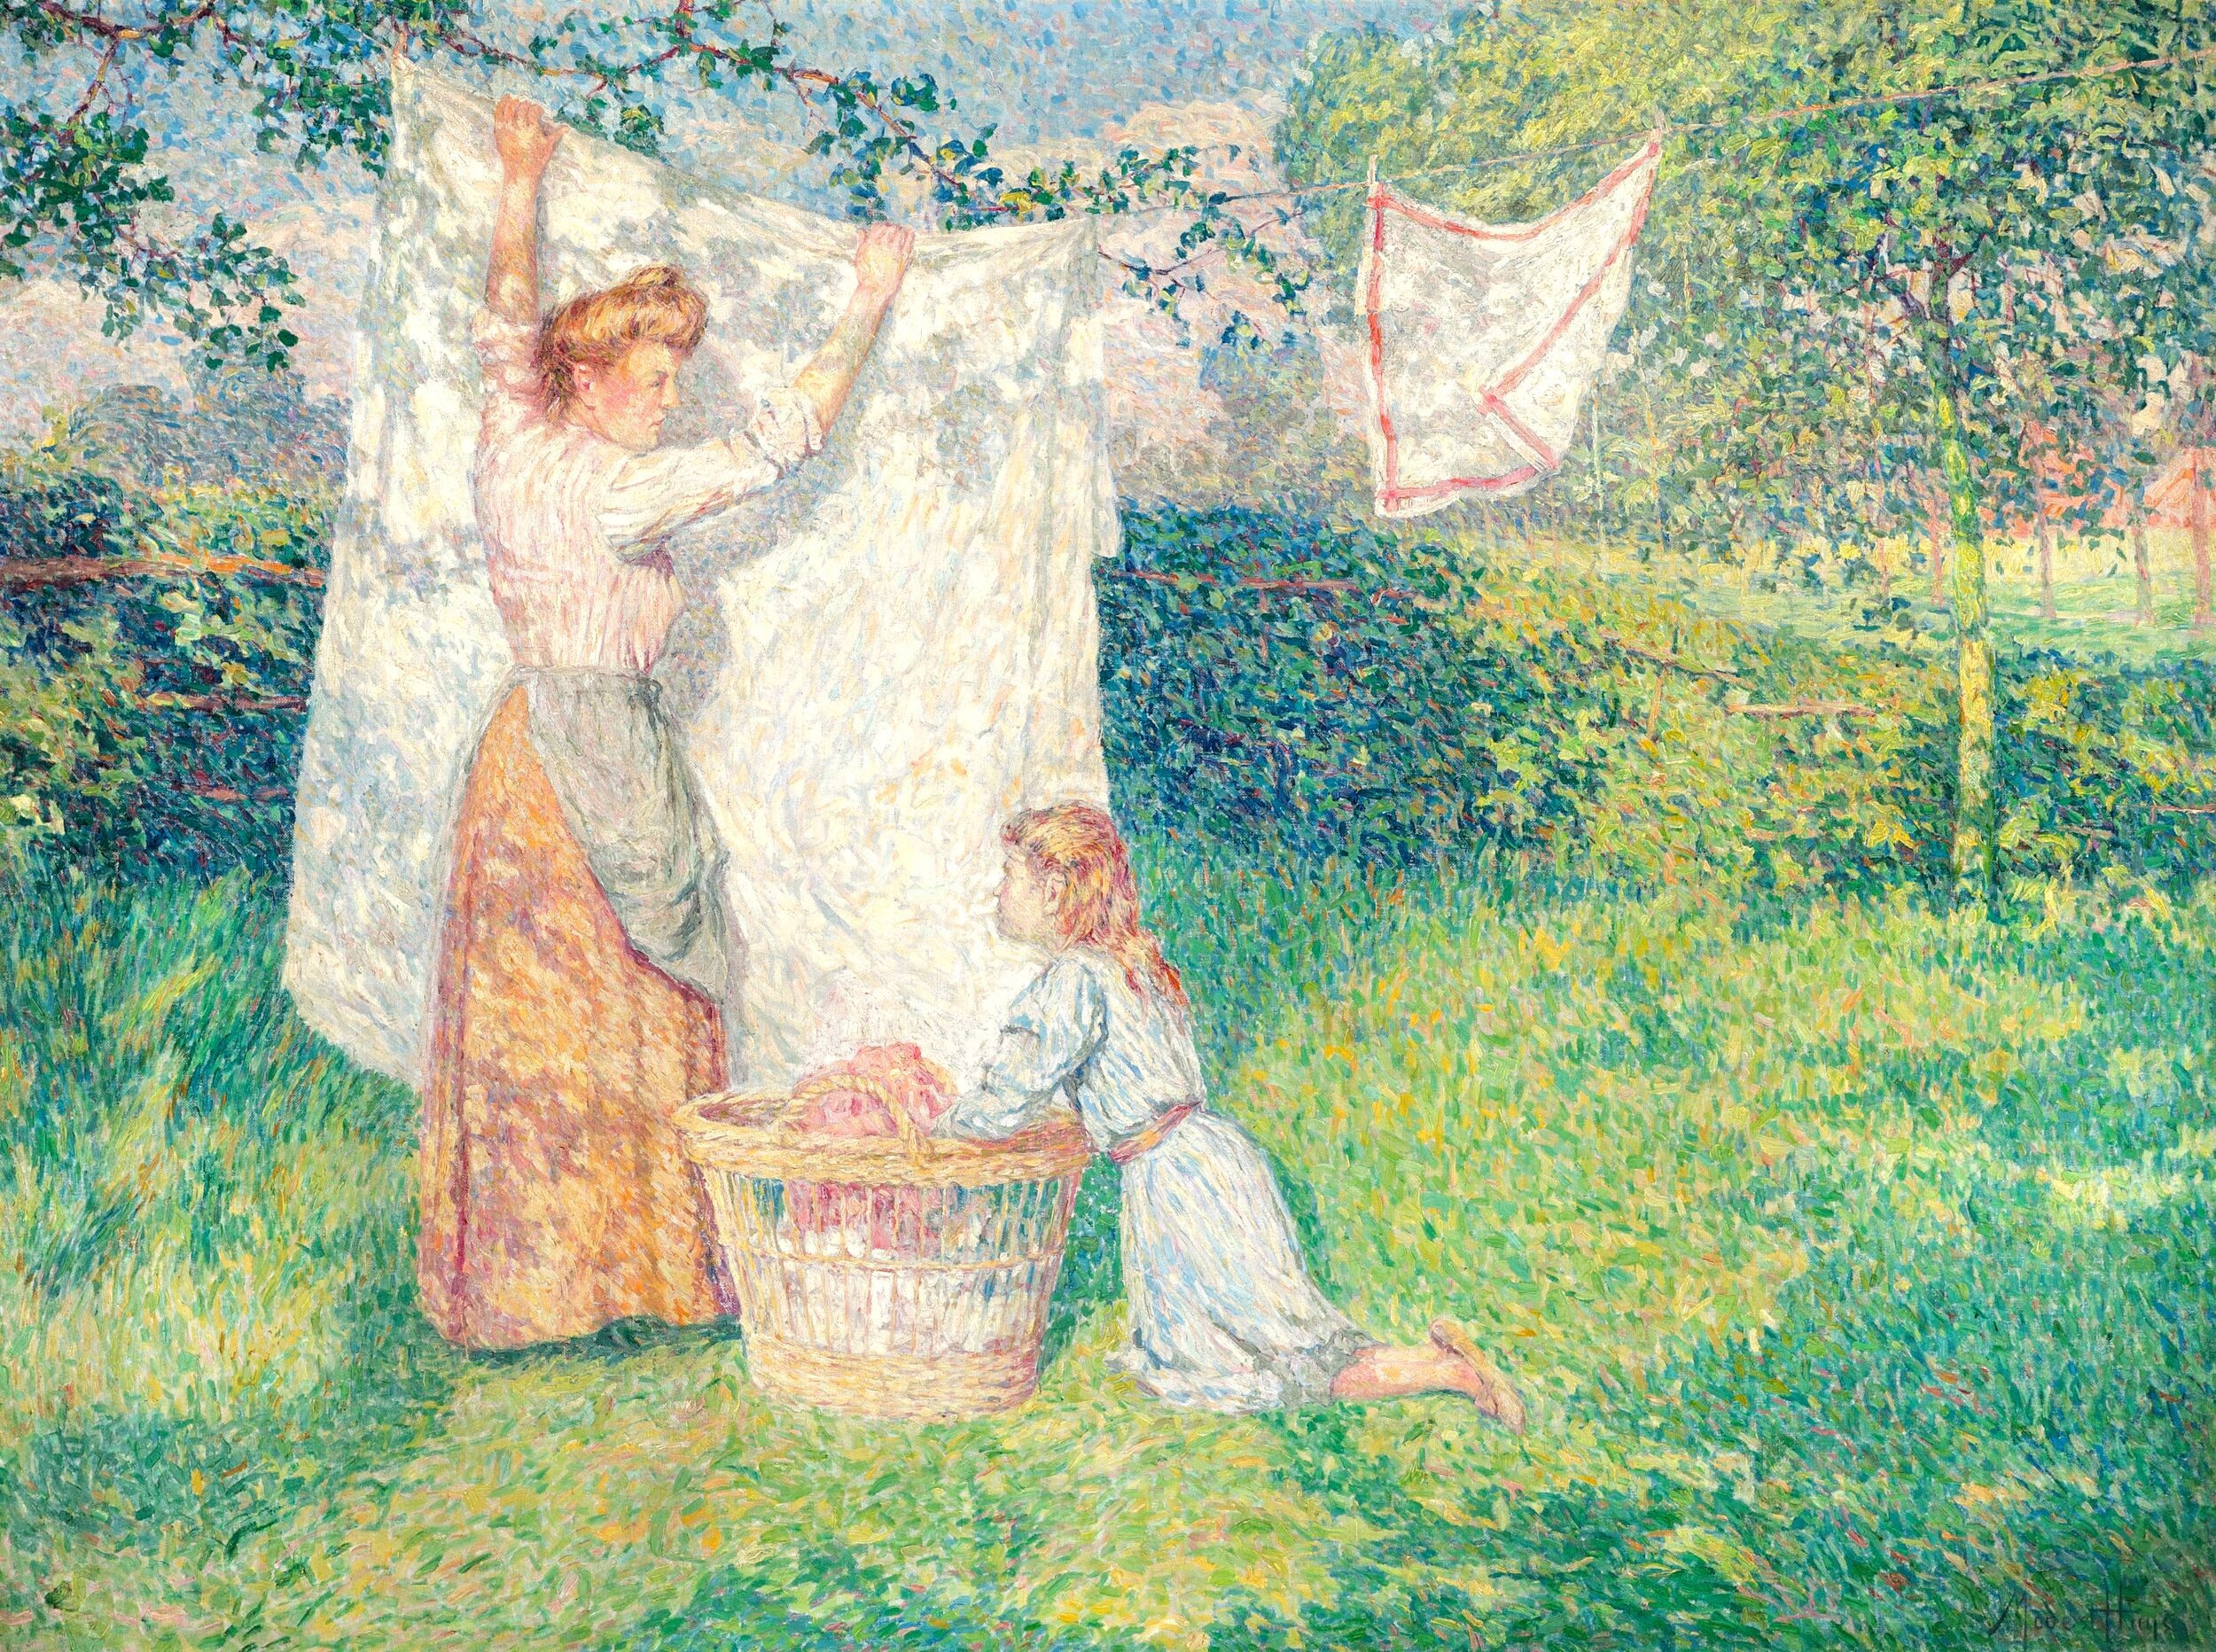 Drying the Laundry by Modest Huys - 1908 - 95 x 128 cm private collection